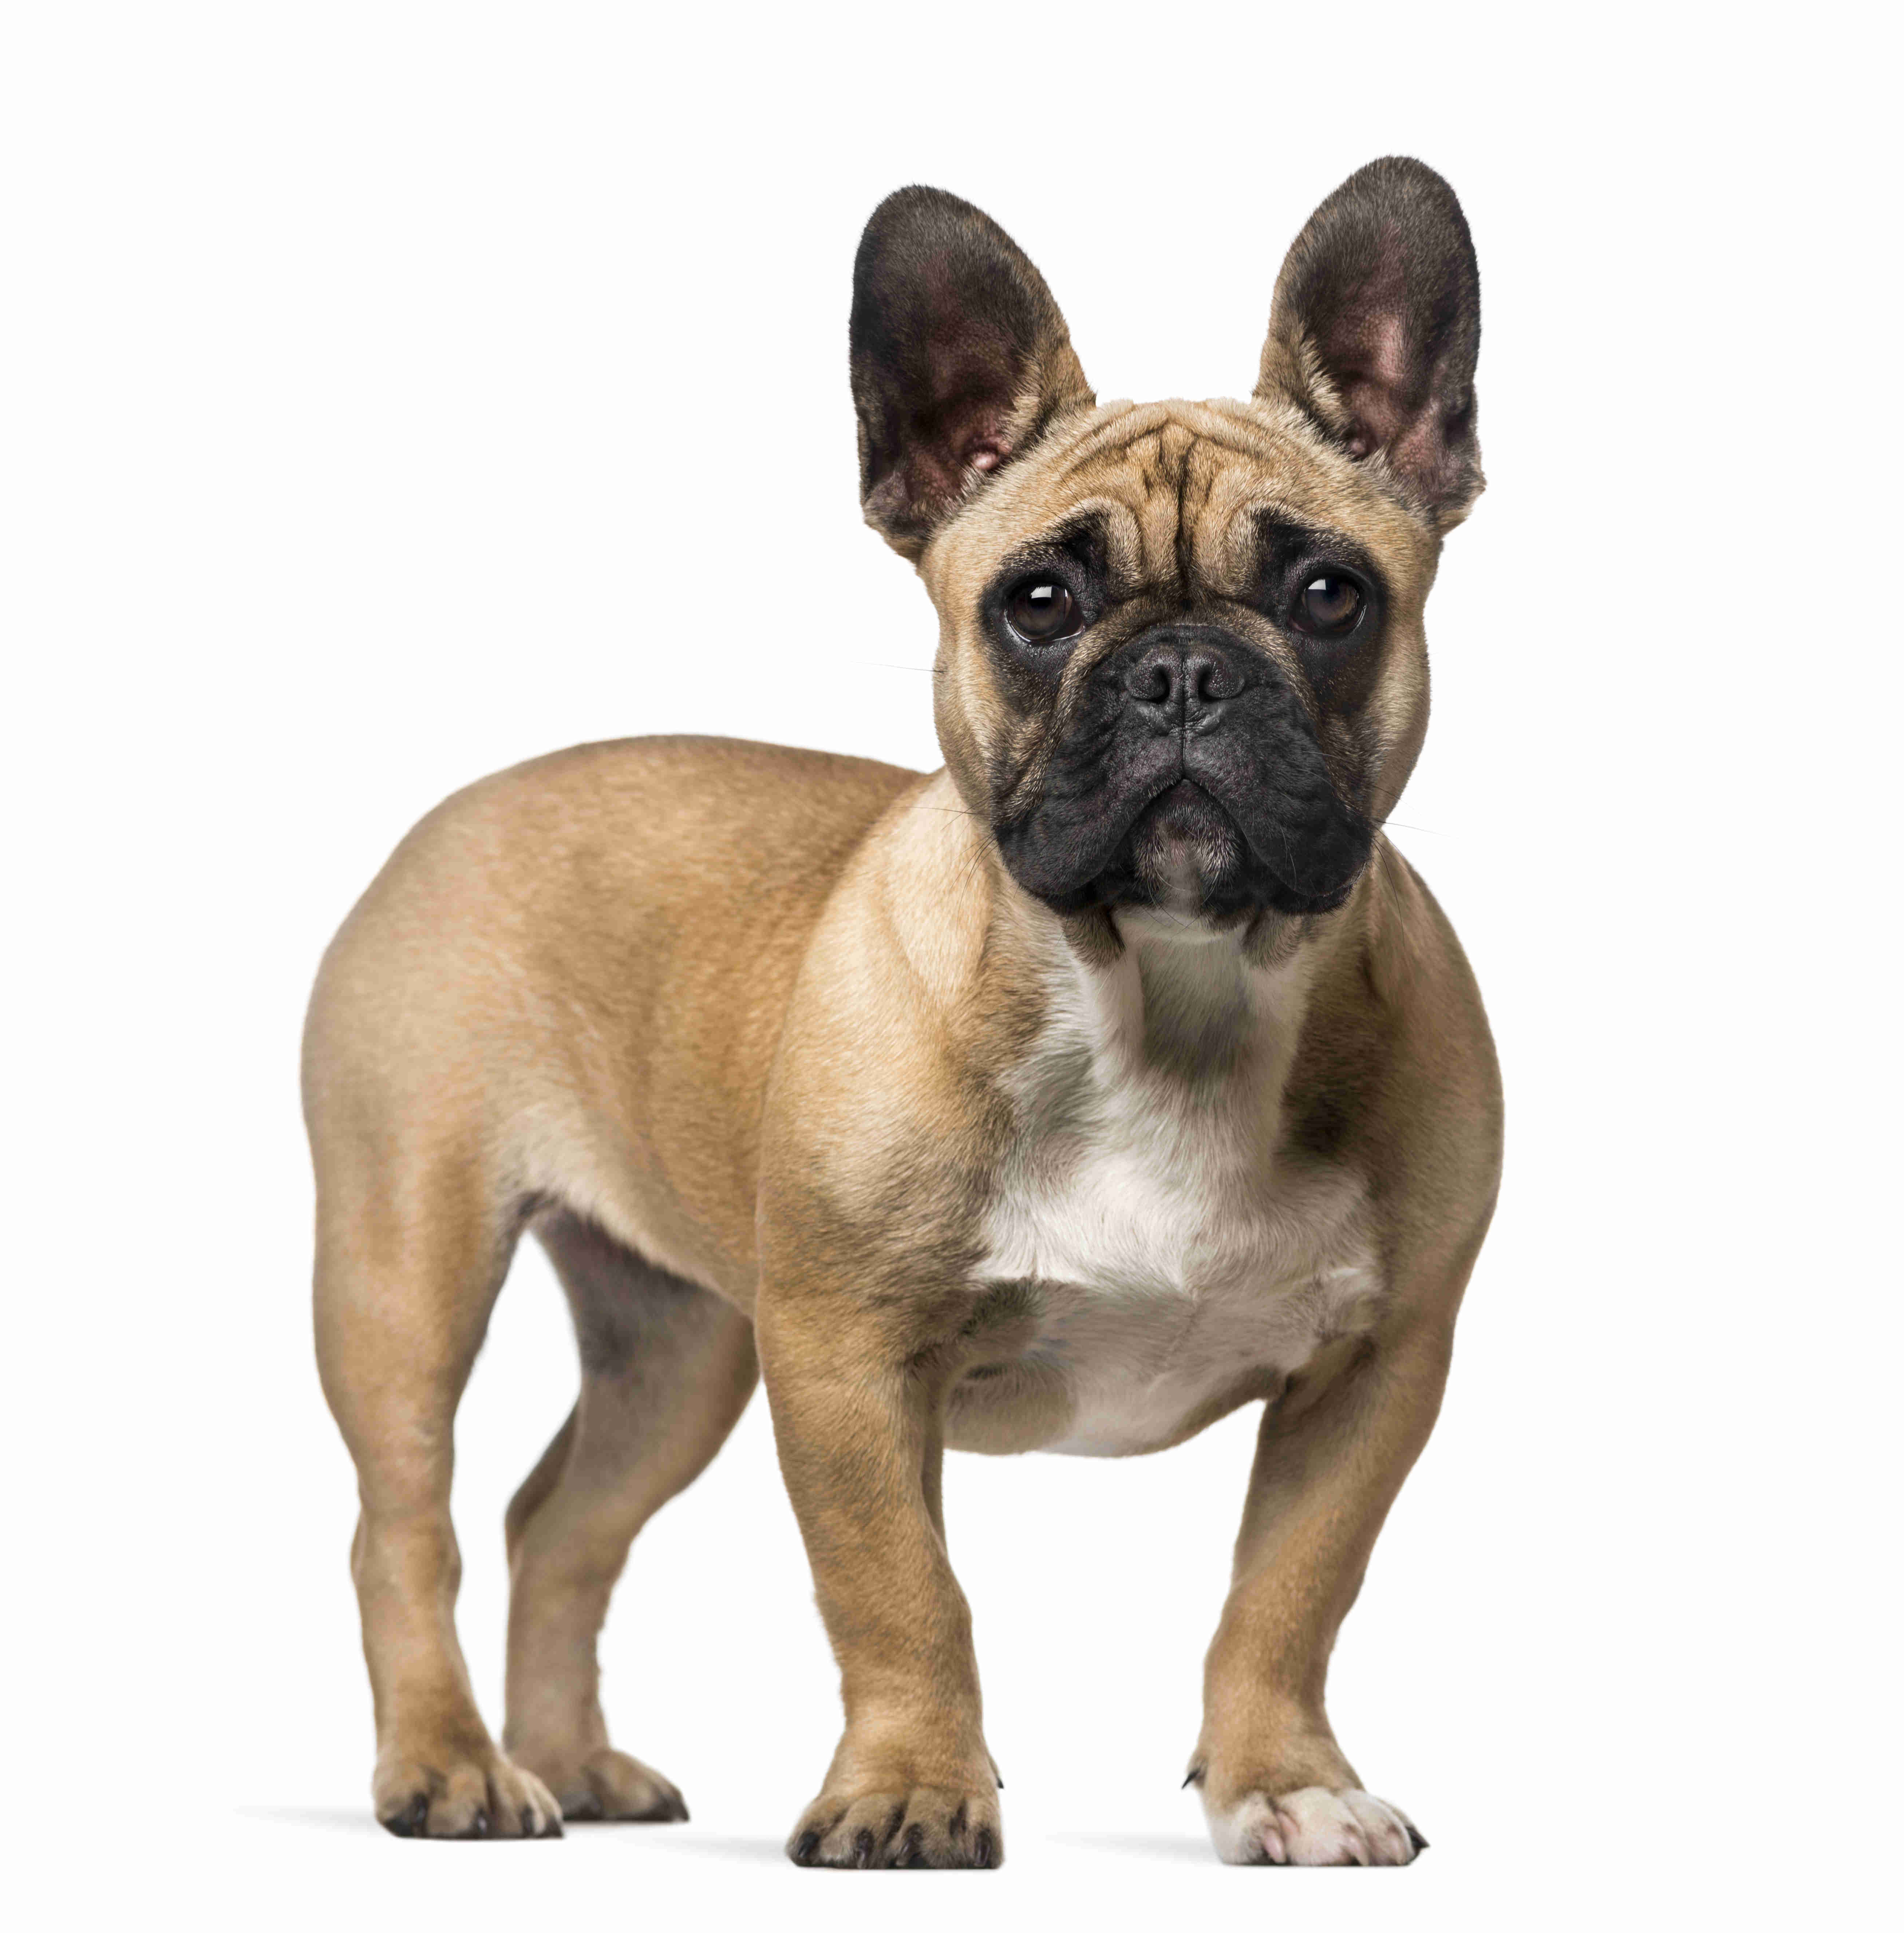 Training Tips: How to Teach Your French Bulldog Puppy to Stay Calm During Car Rides